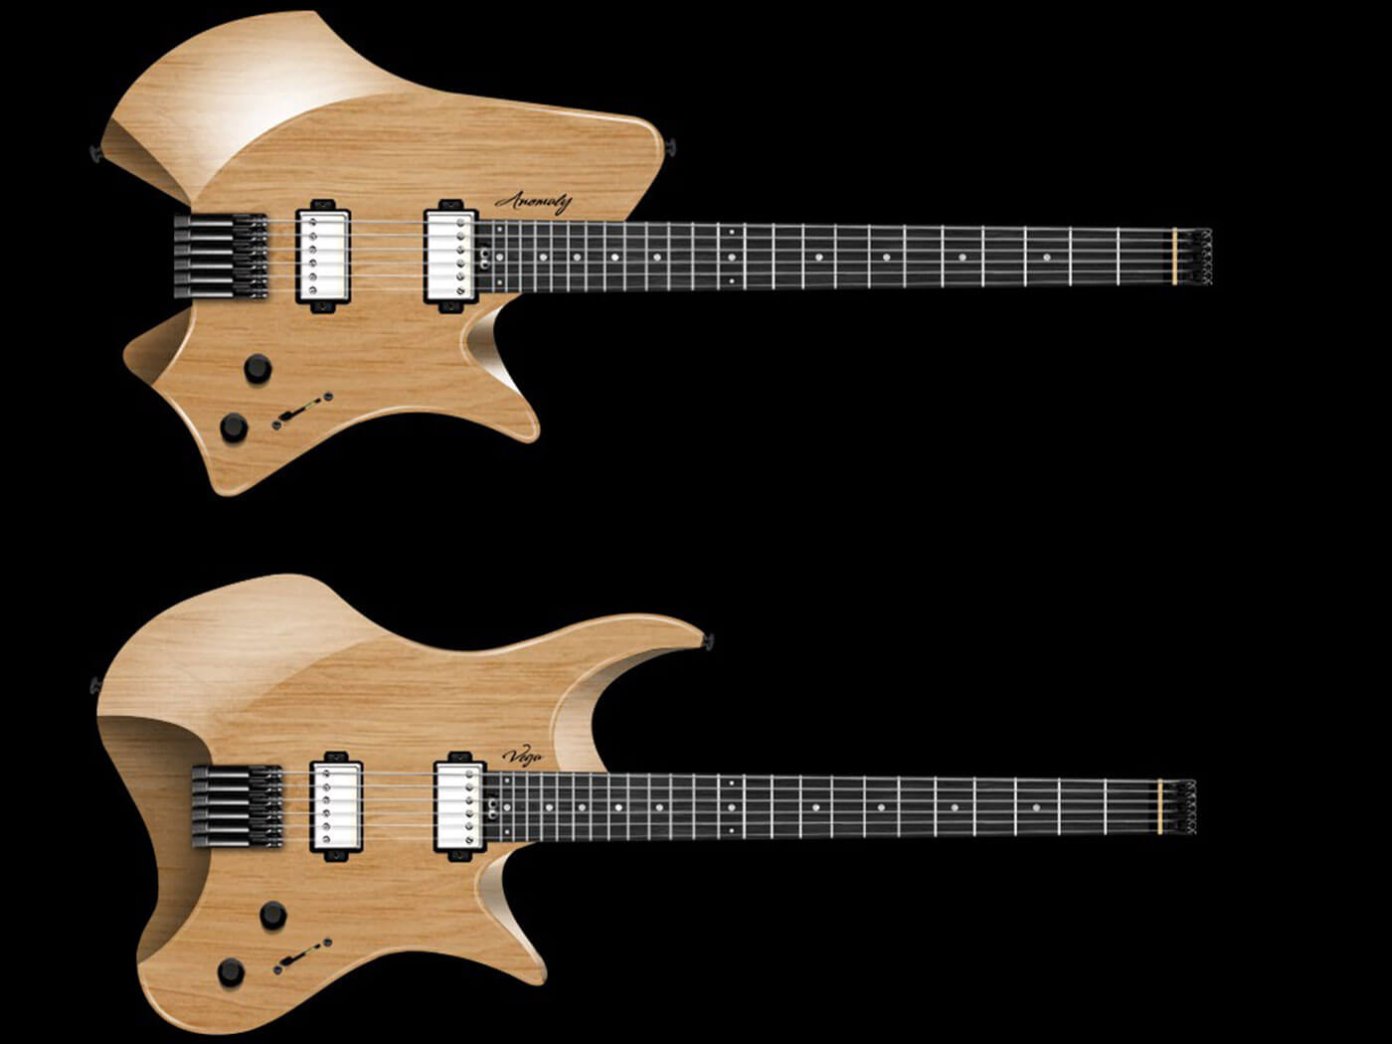 Balaguer Guitars launches two new headless models, the Vega and the Anomaly